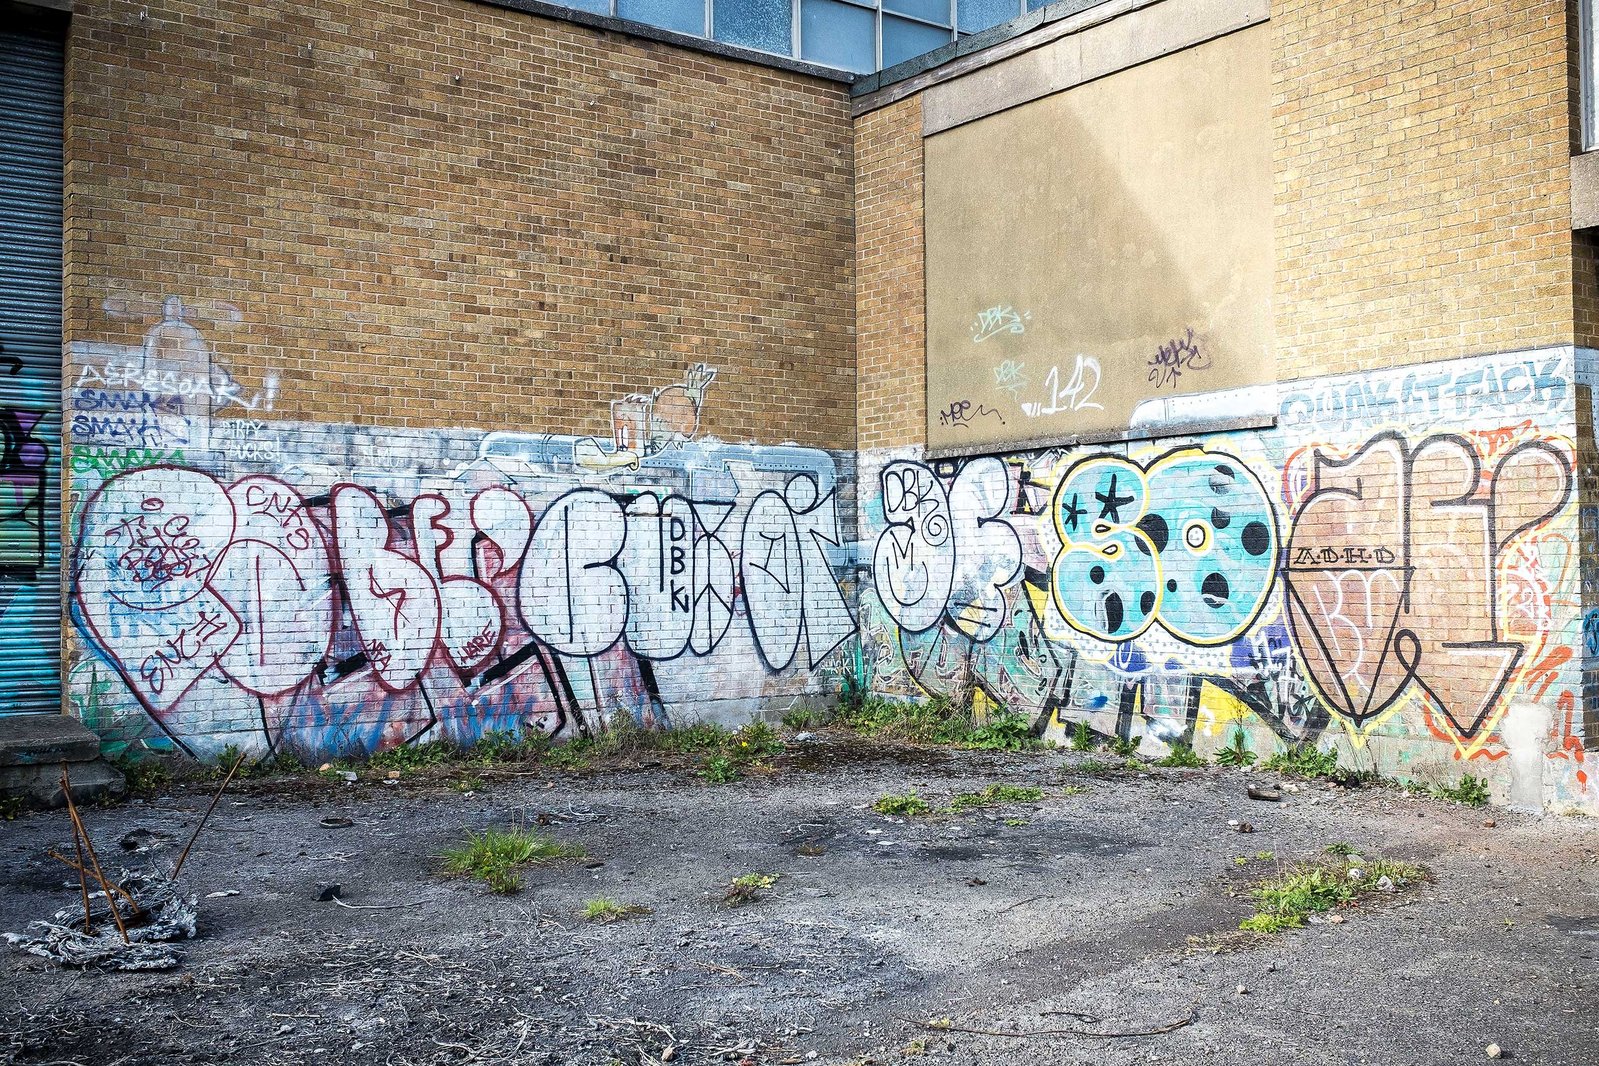 Graffiti on the rear of the sewage pumping station